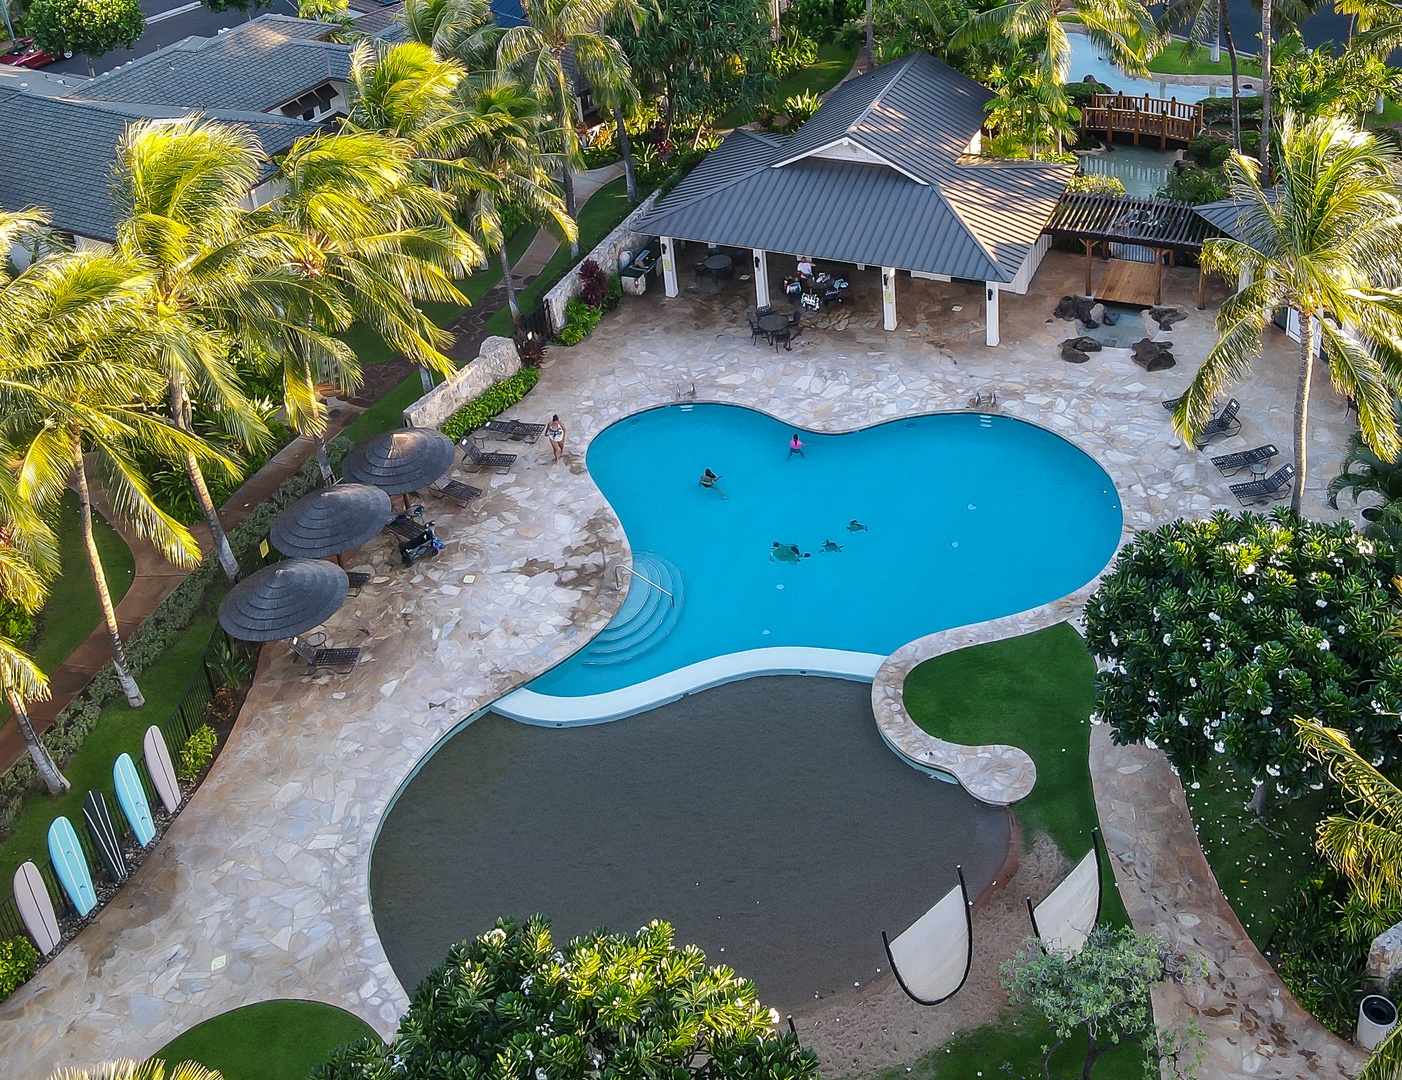 Kapolei Vacation Rentals, Coconut Plantation 1174-2 - Go for a swim in the sparkling waters and rest in the lounge chairs.